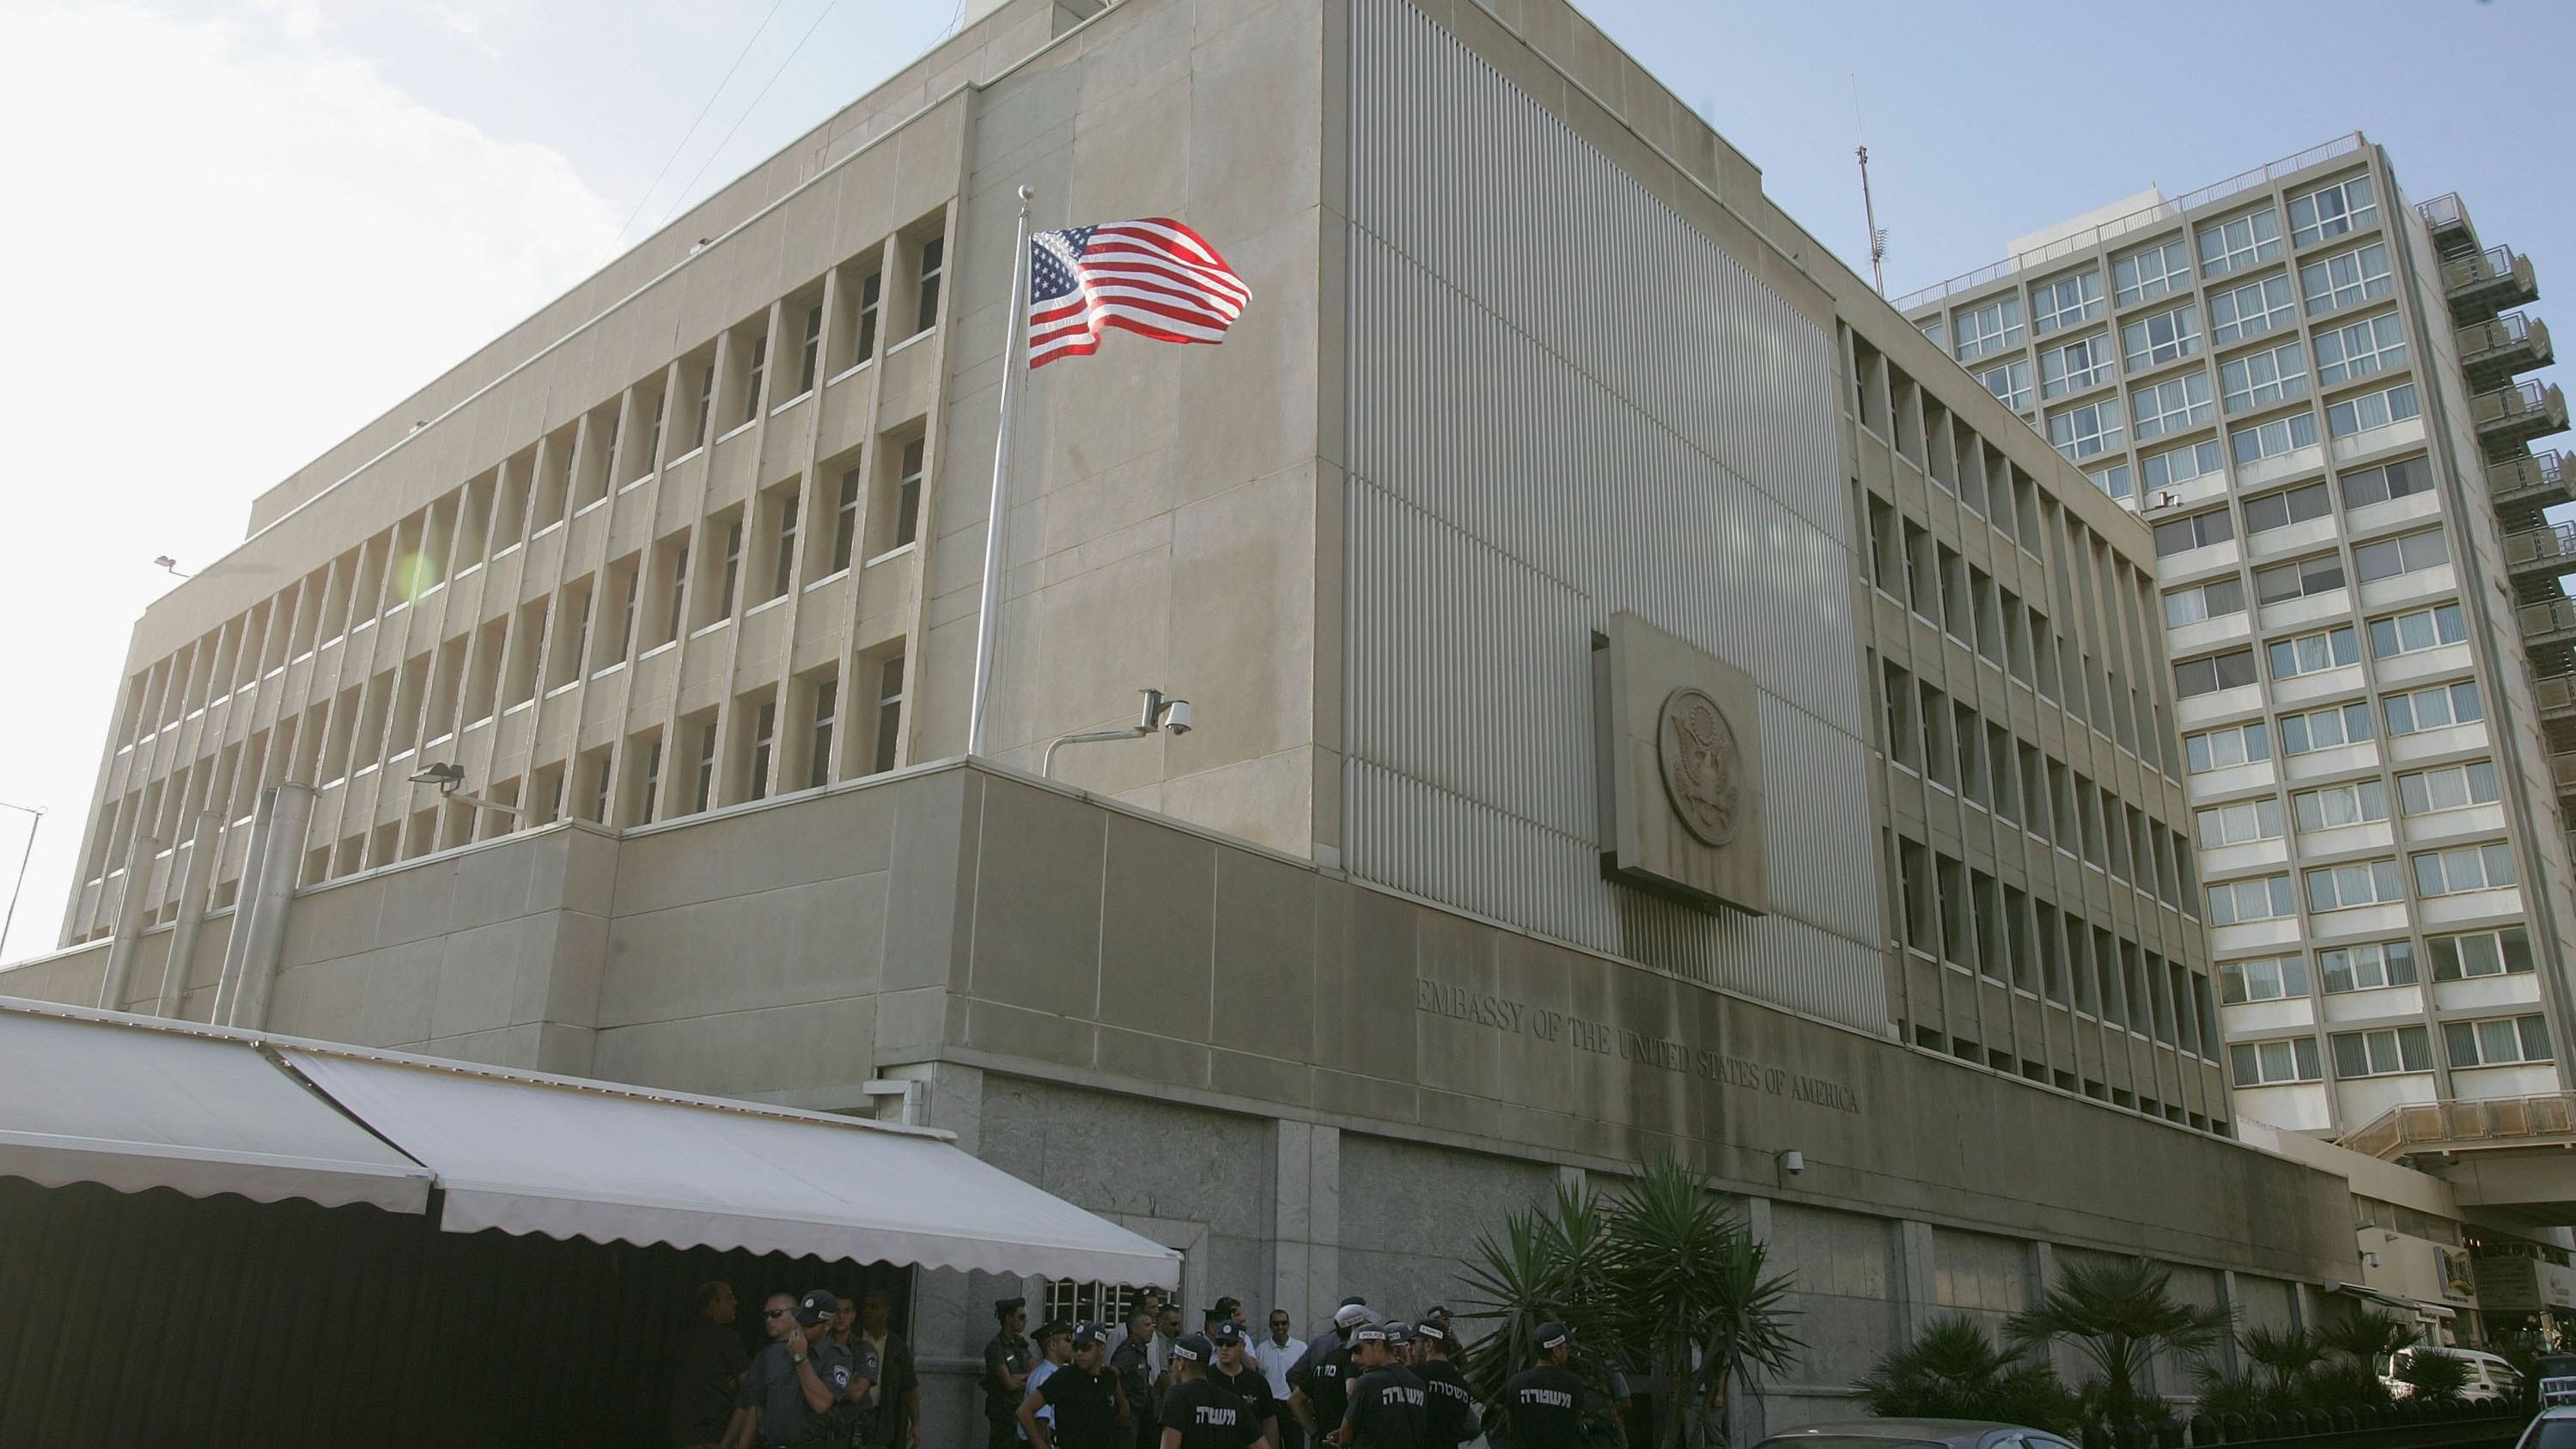 Like that of most countries, the U.S. Embassy in Israel is located in Tel Aviv.